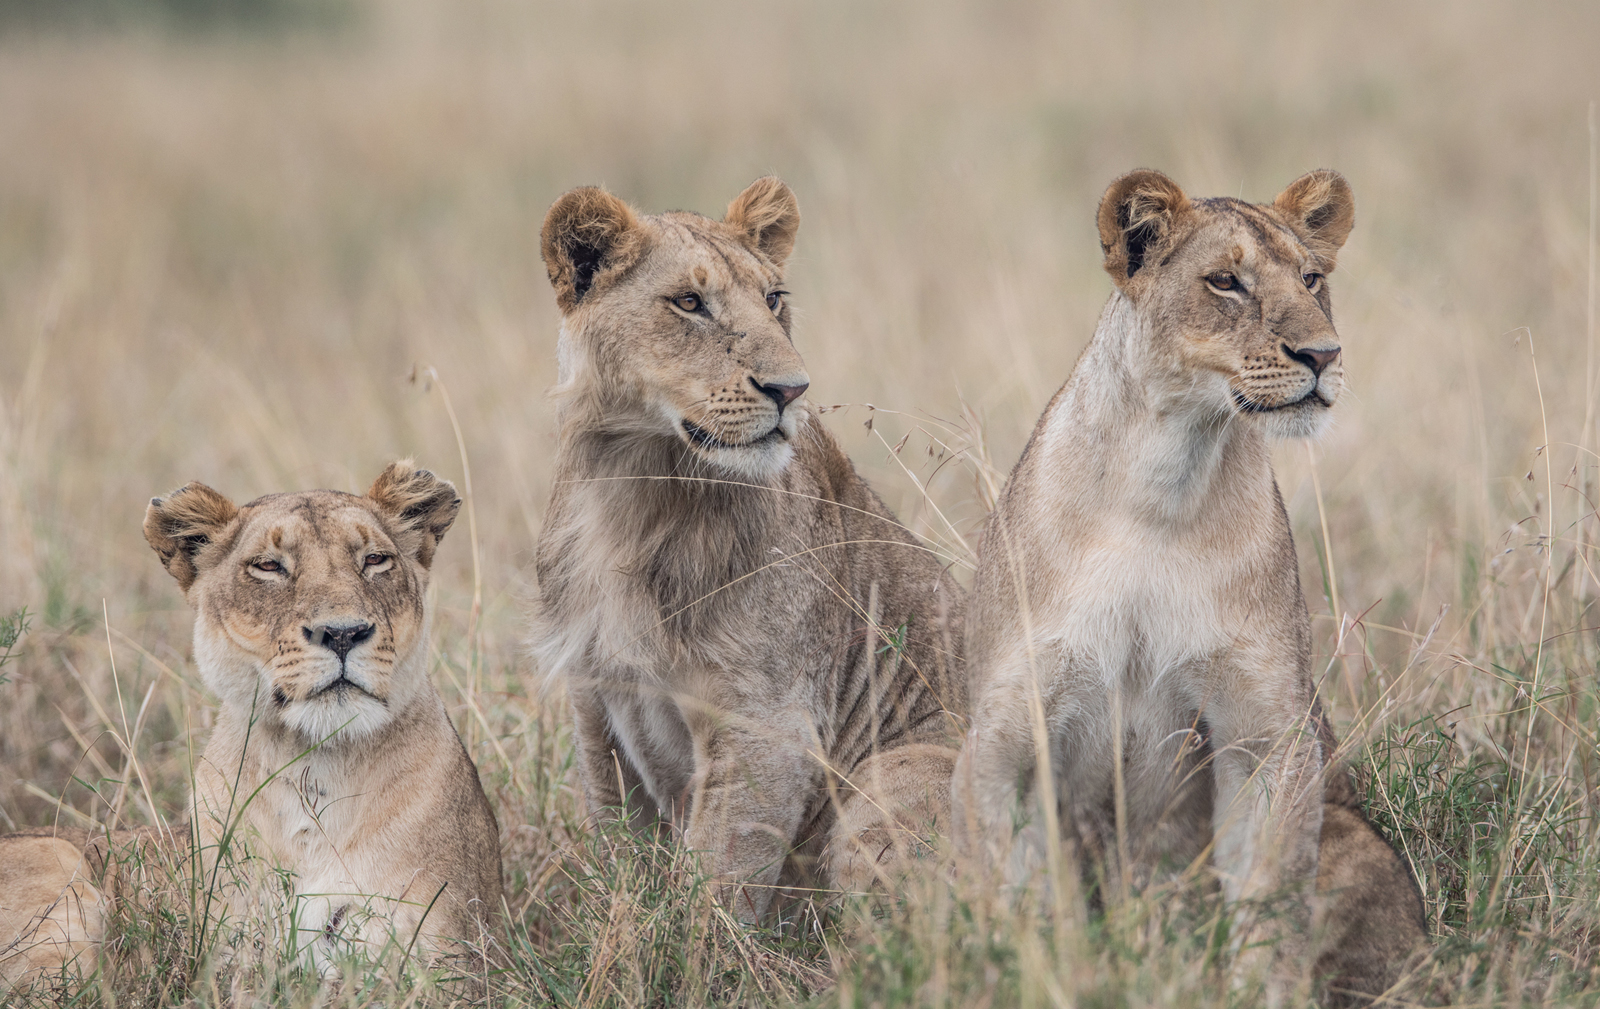 Pack of lions sitting together in the wild